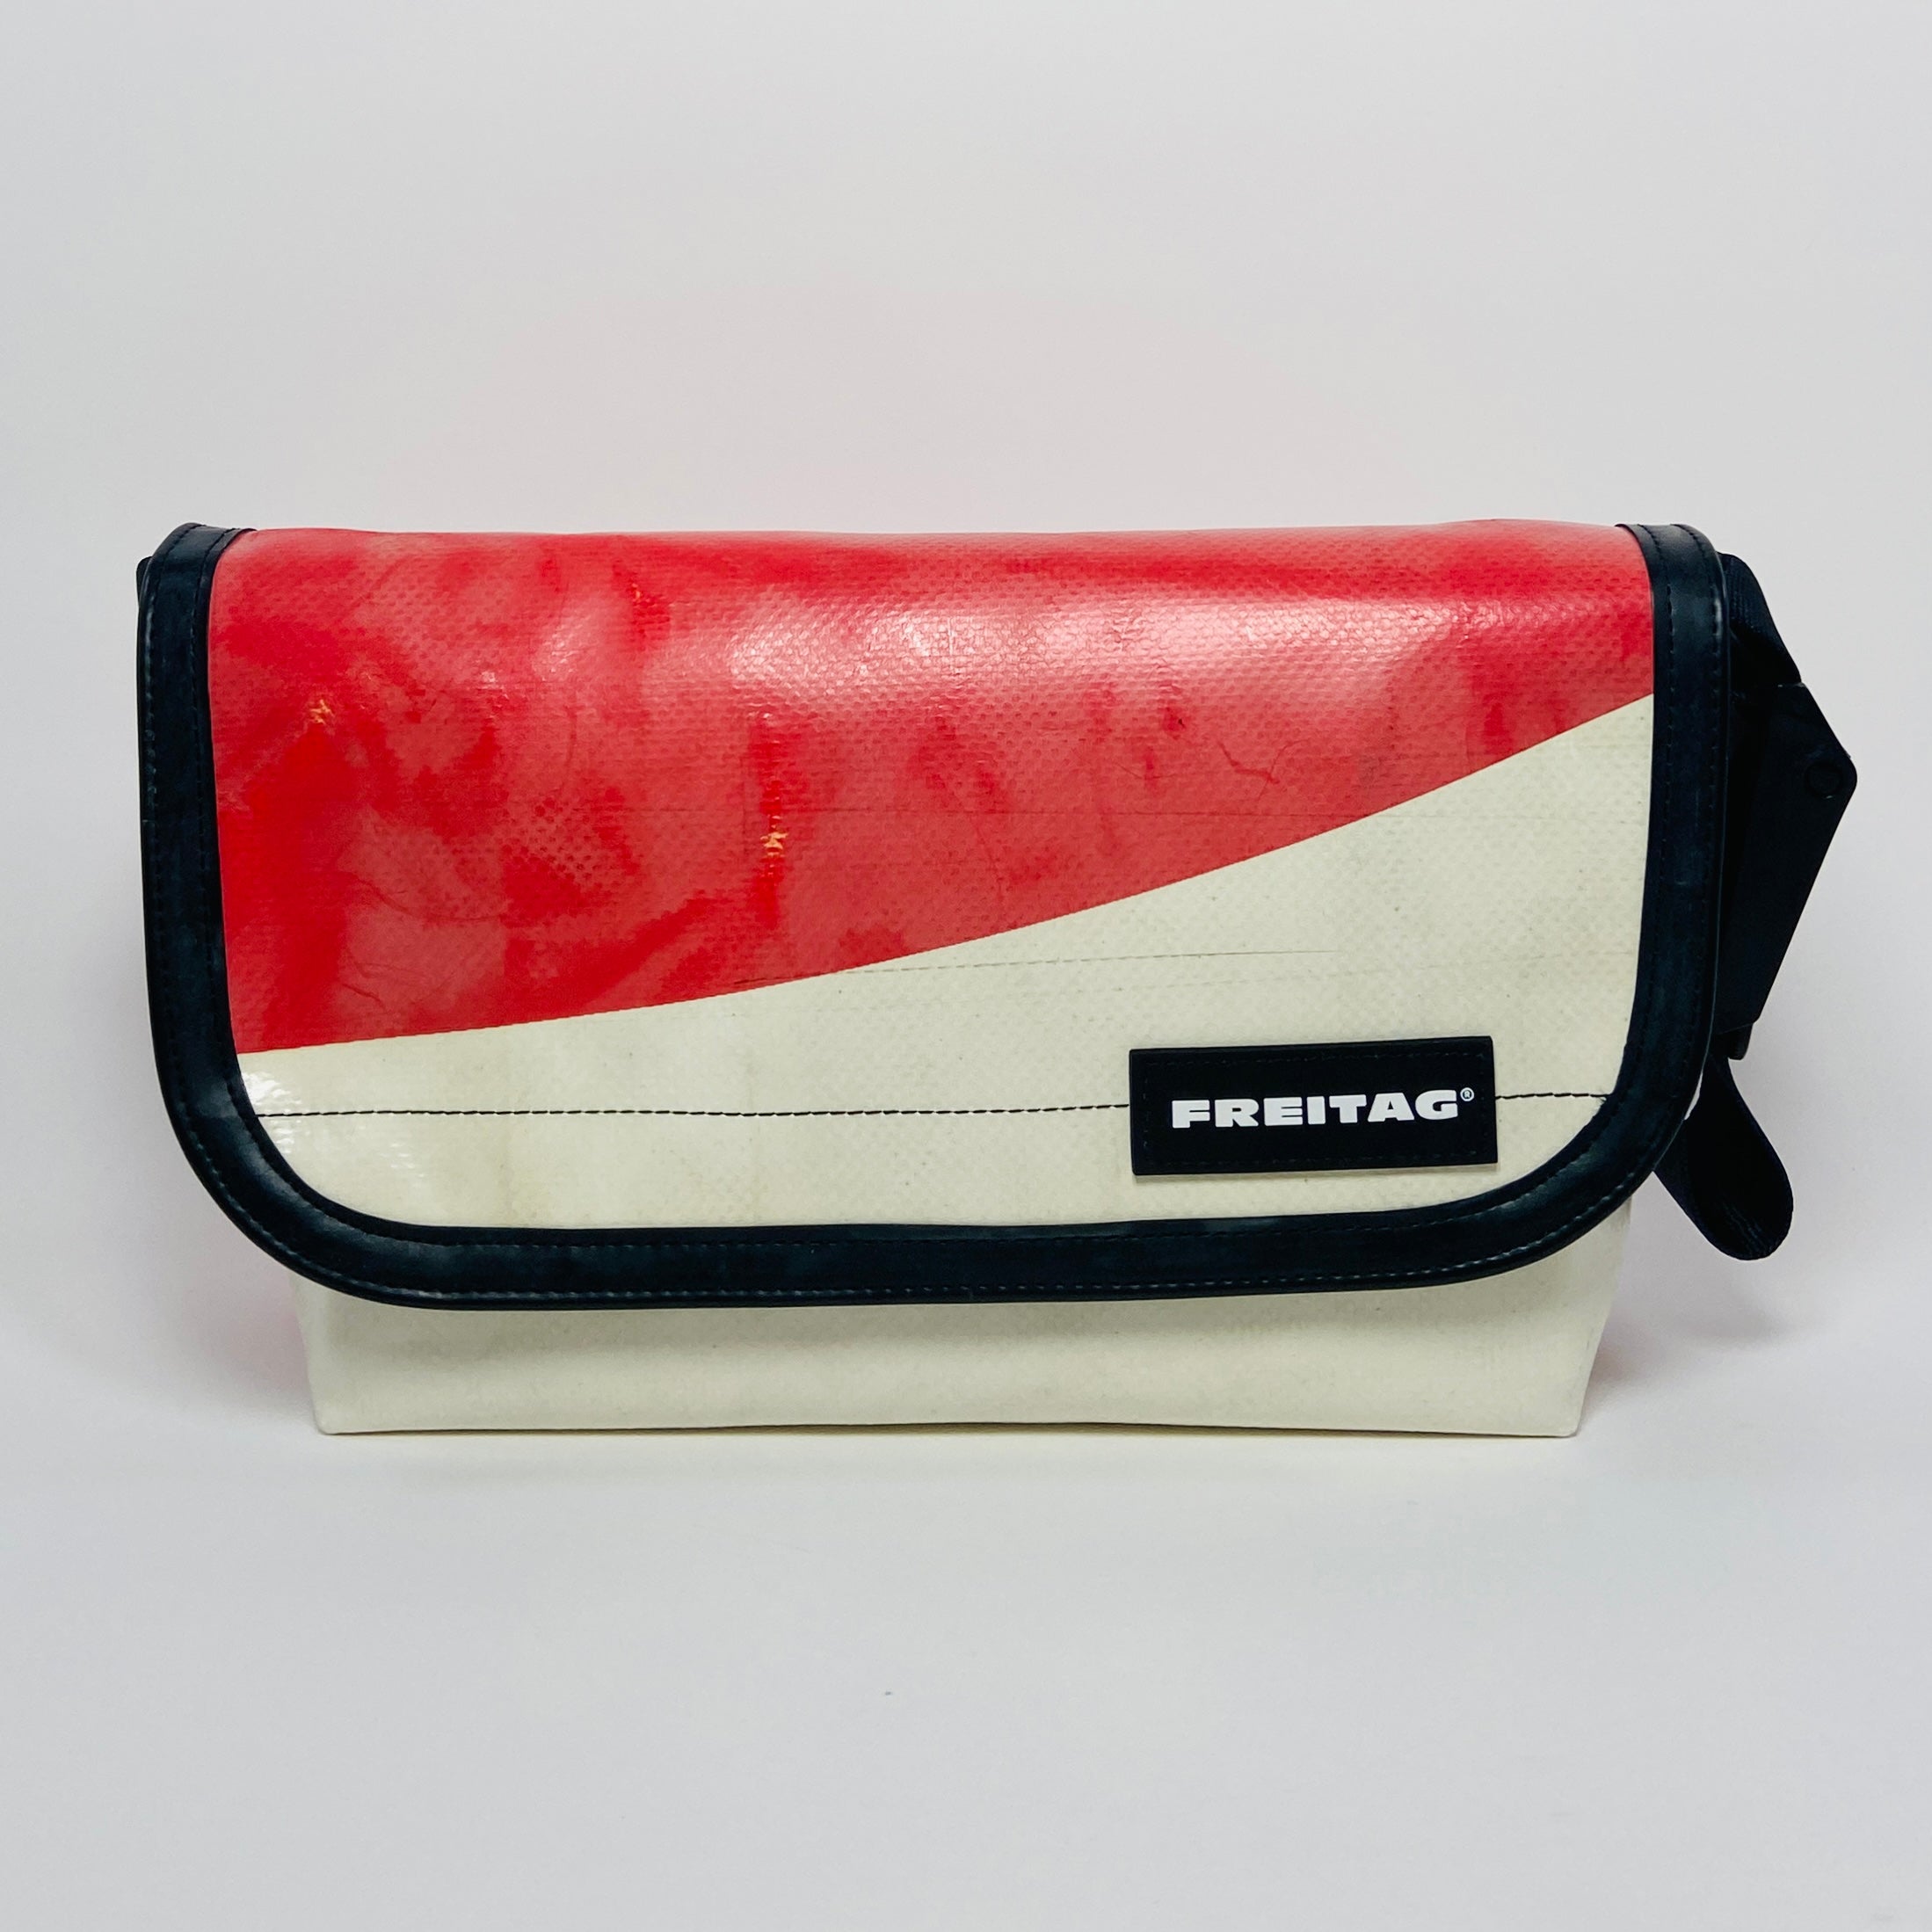 FREITAG F41 - Hawaii Five-0 - Salmon Red and White | UNITOM